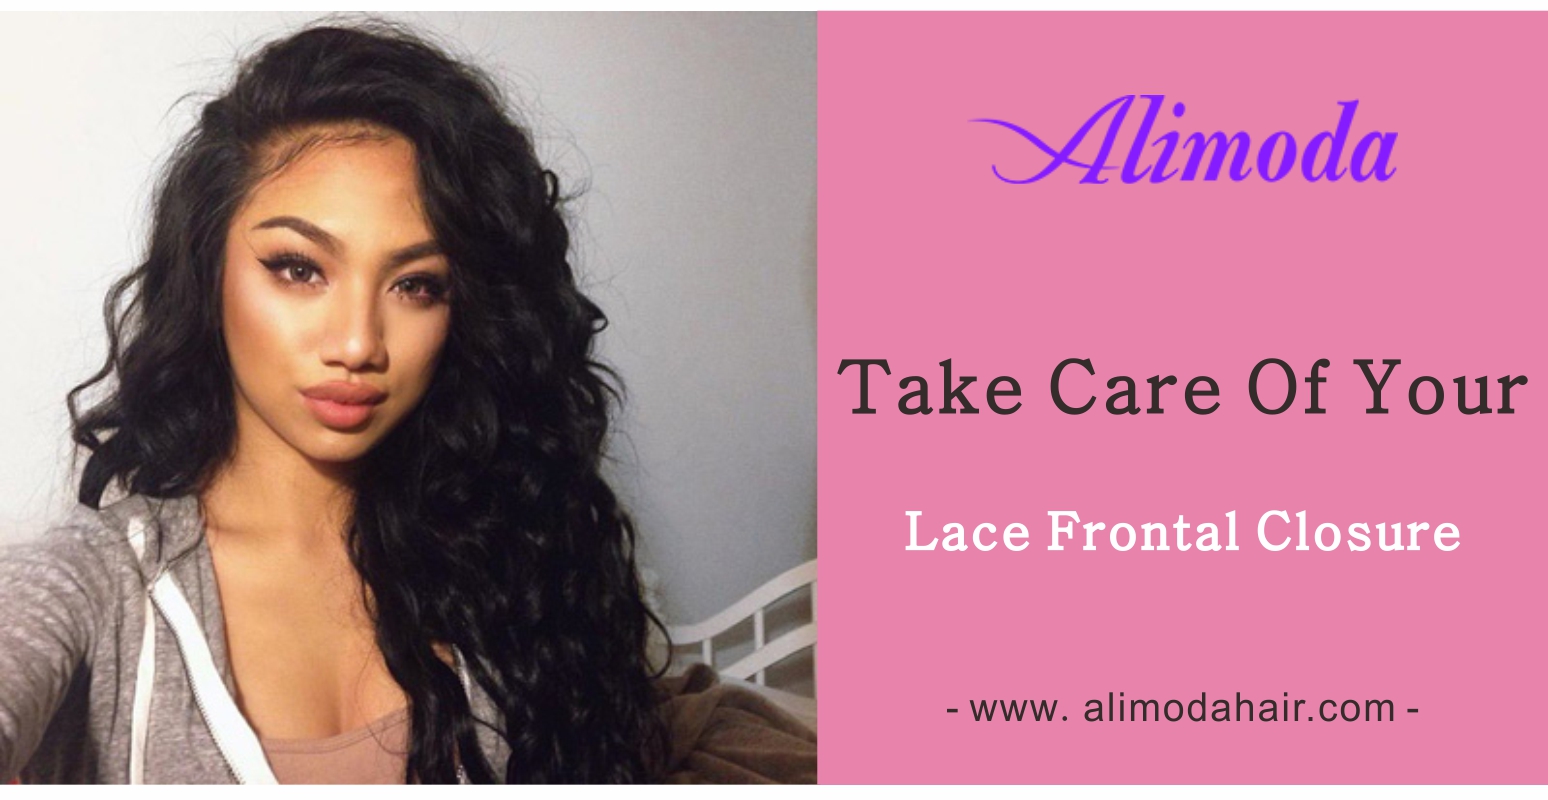 Take care of your lace frontal closure